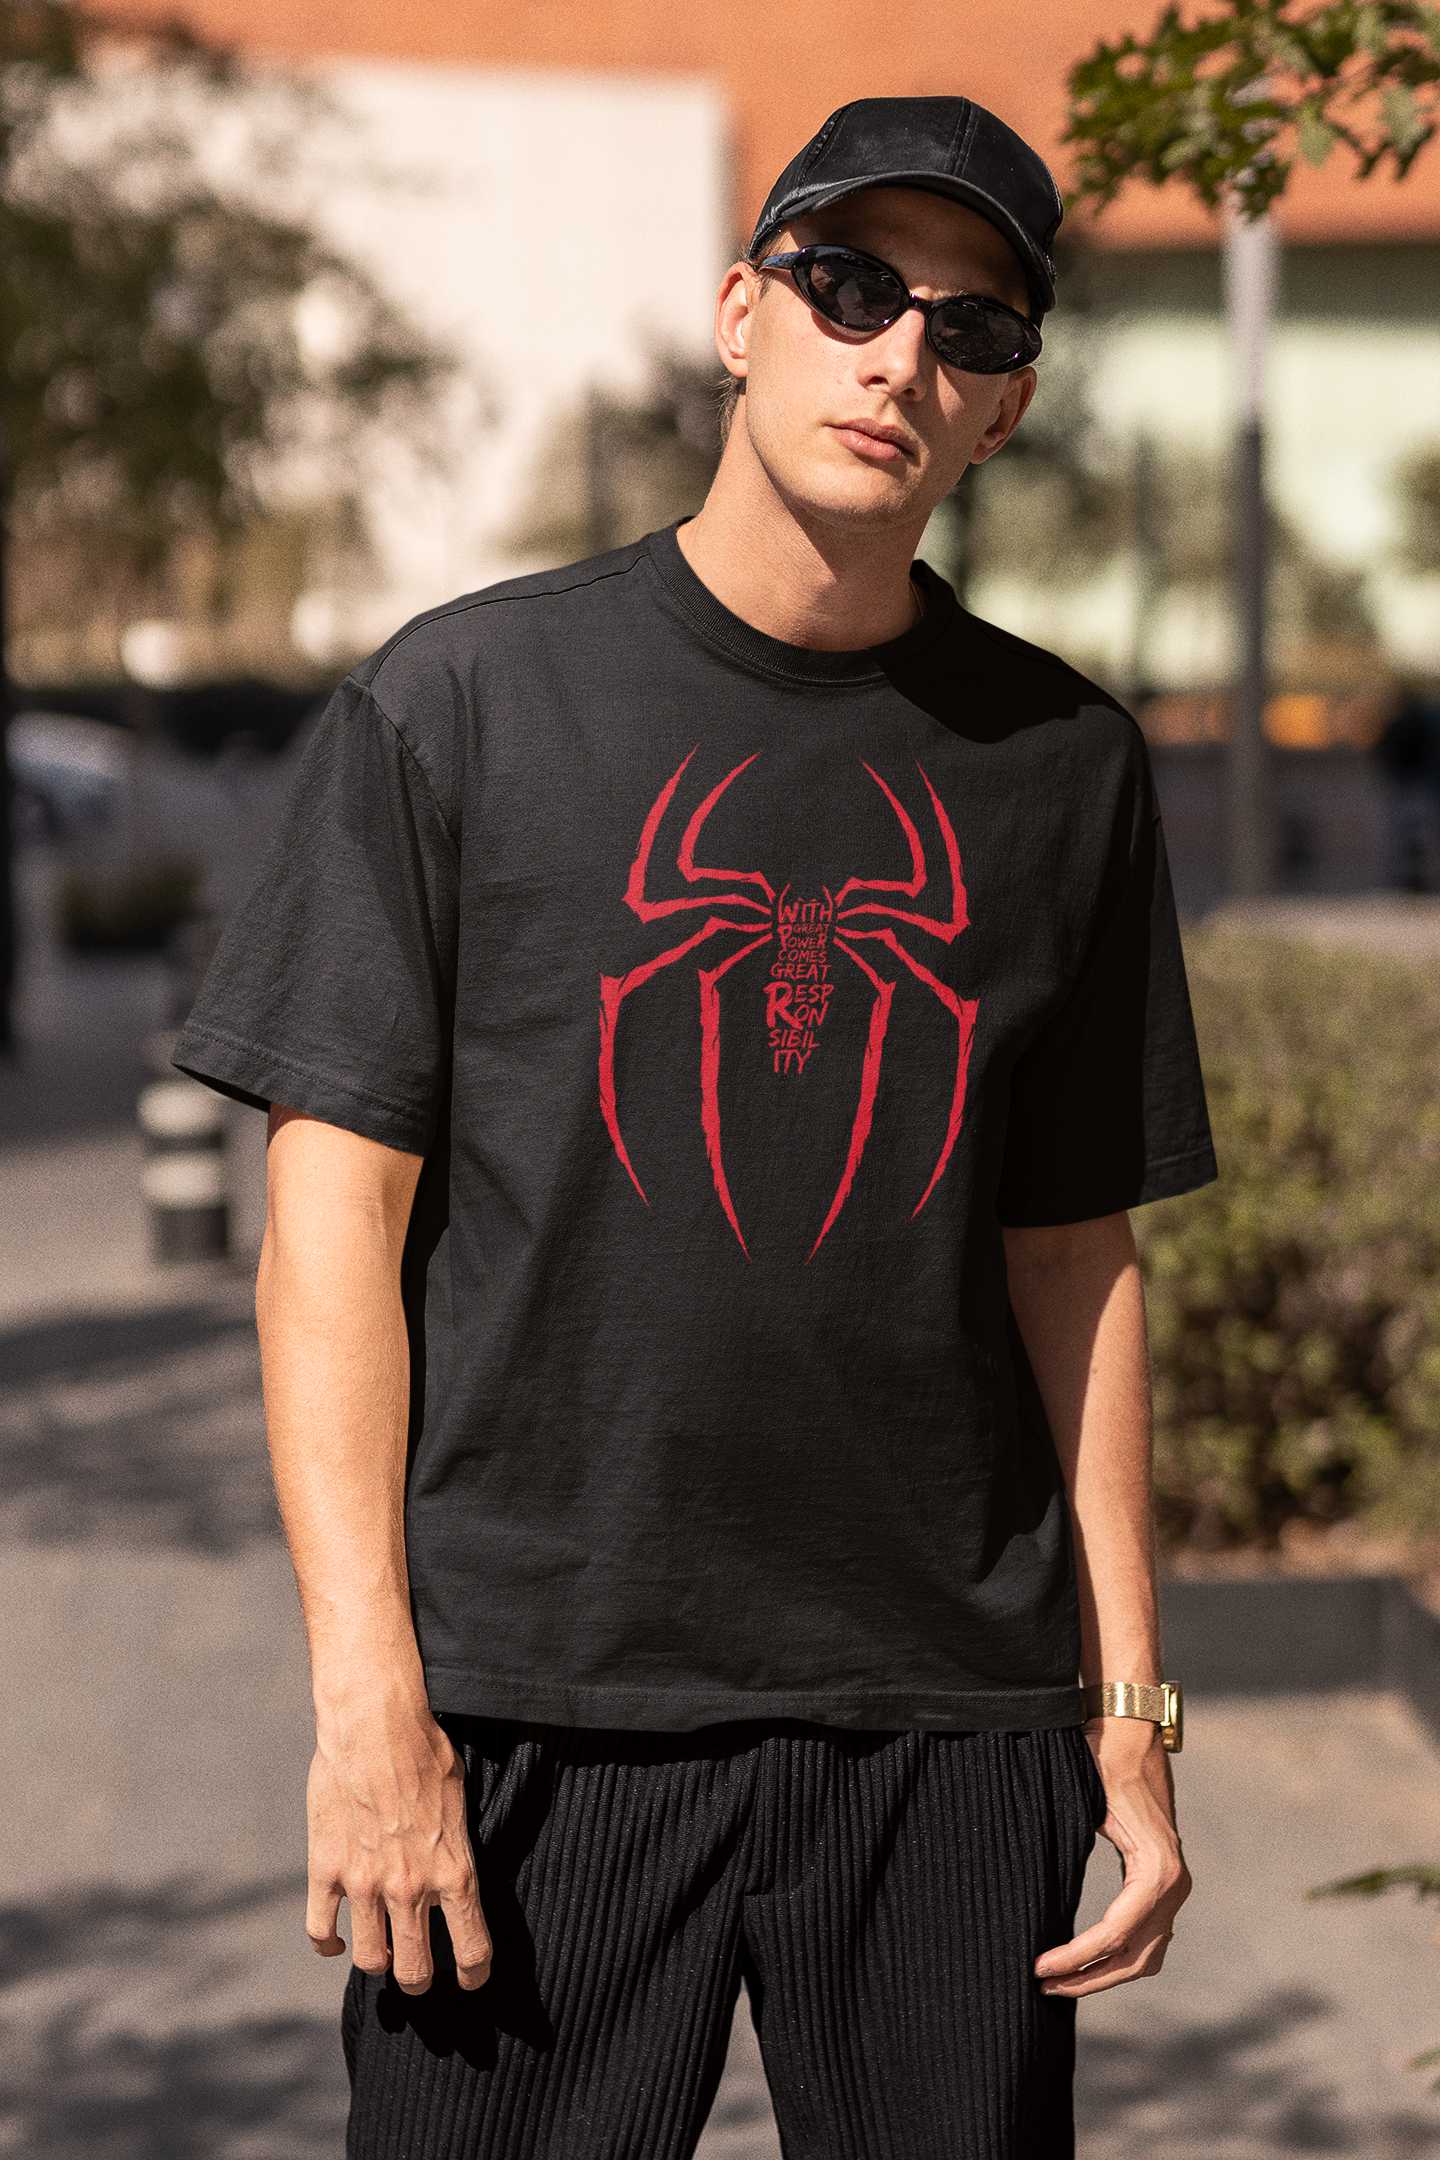 With Great Power Comes Great Responsibility - Oversized T Shirt Strong Soul Shirts & Tops